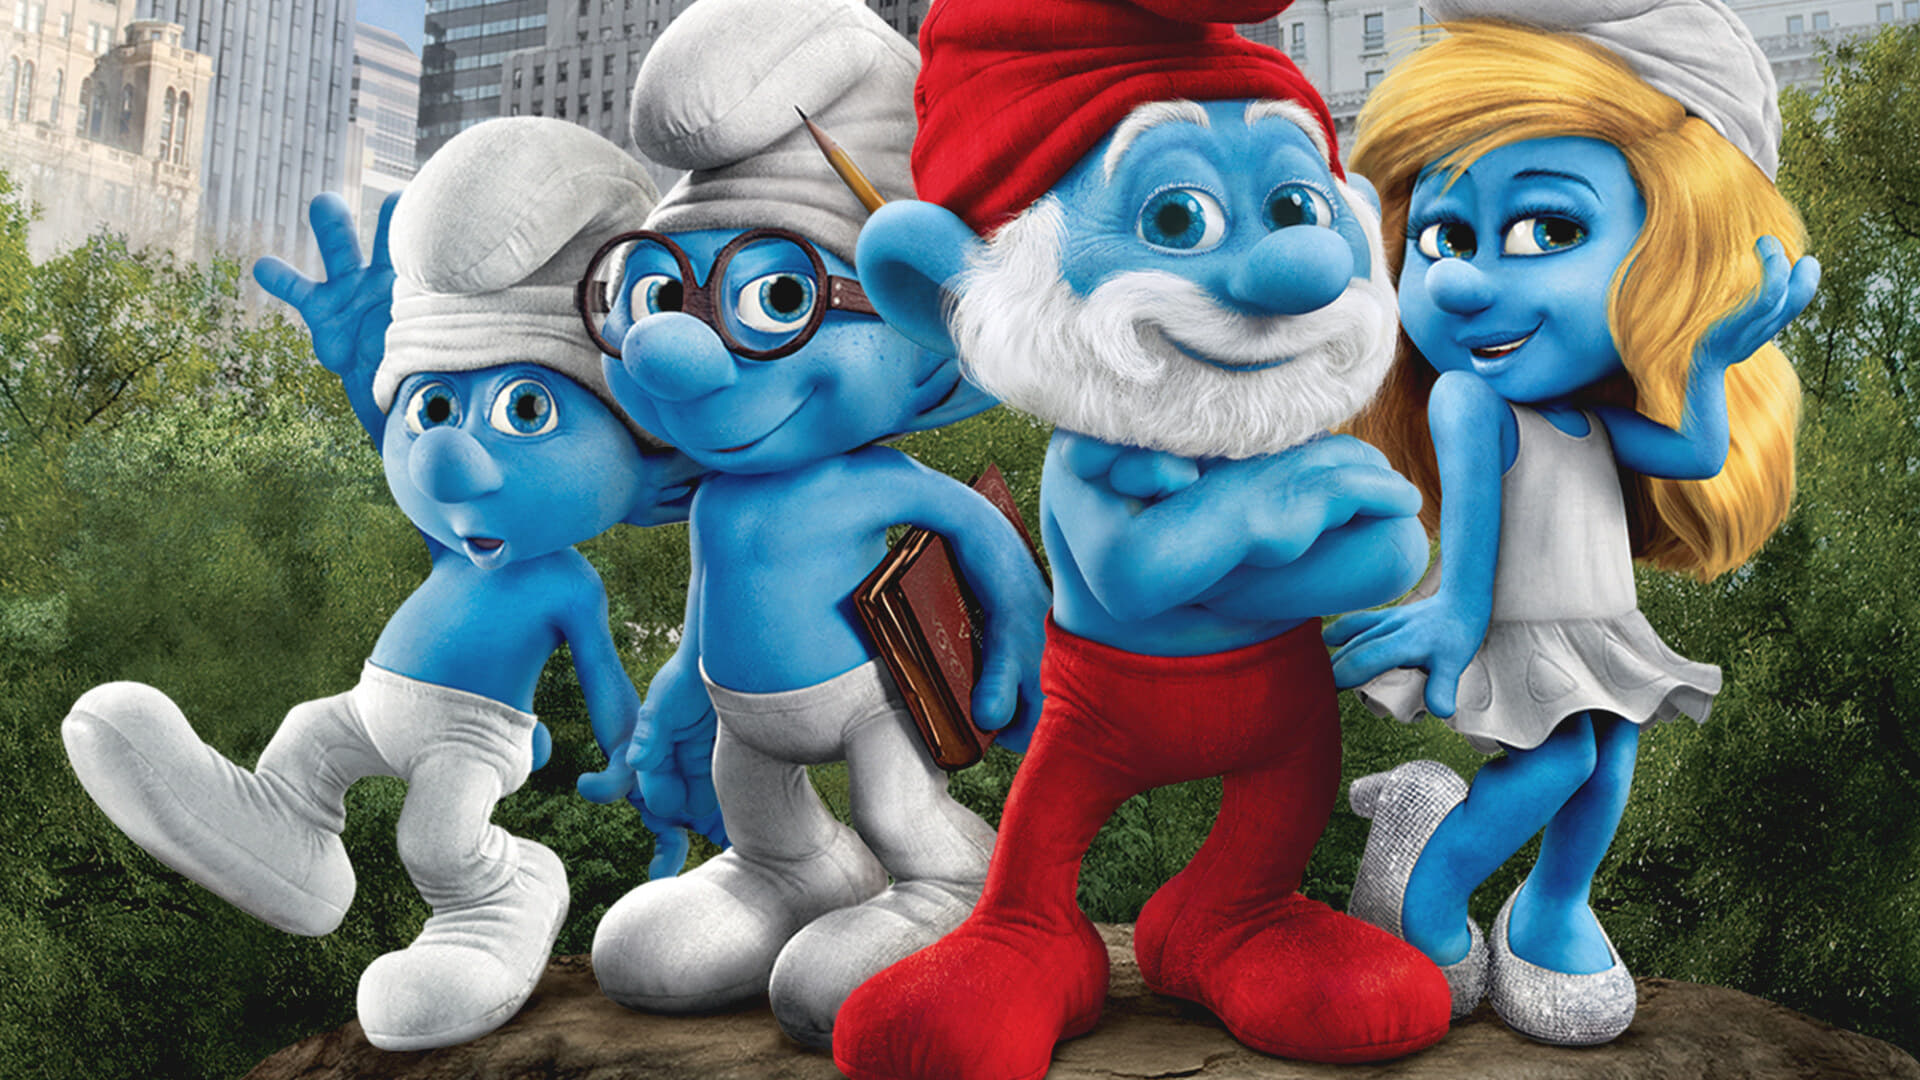 The Smurfs (2011) - When the evil wizard Gargamel chases the tiny blue Smur...